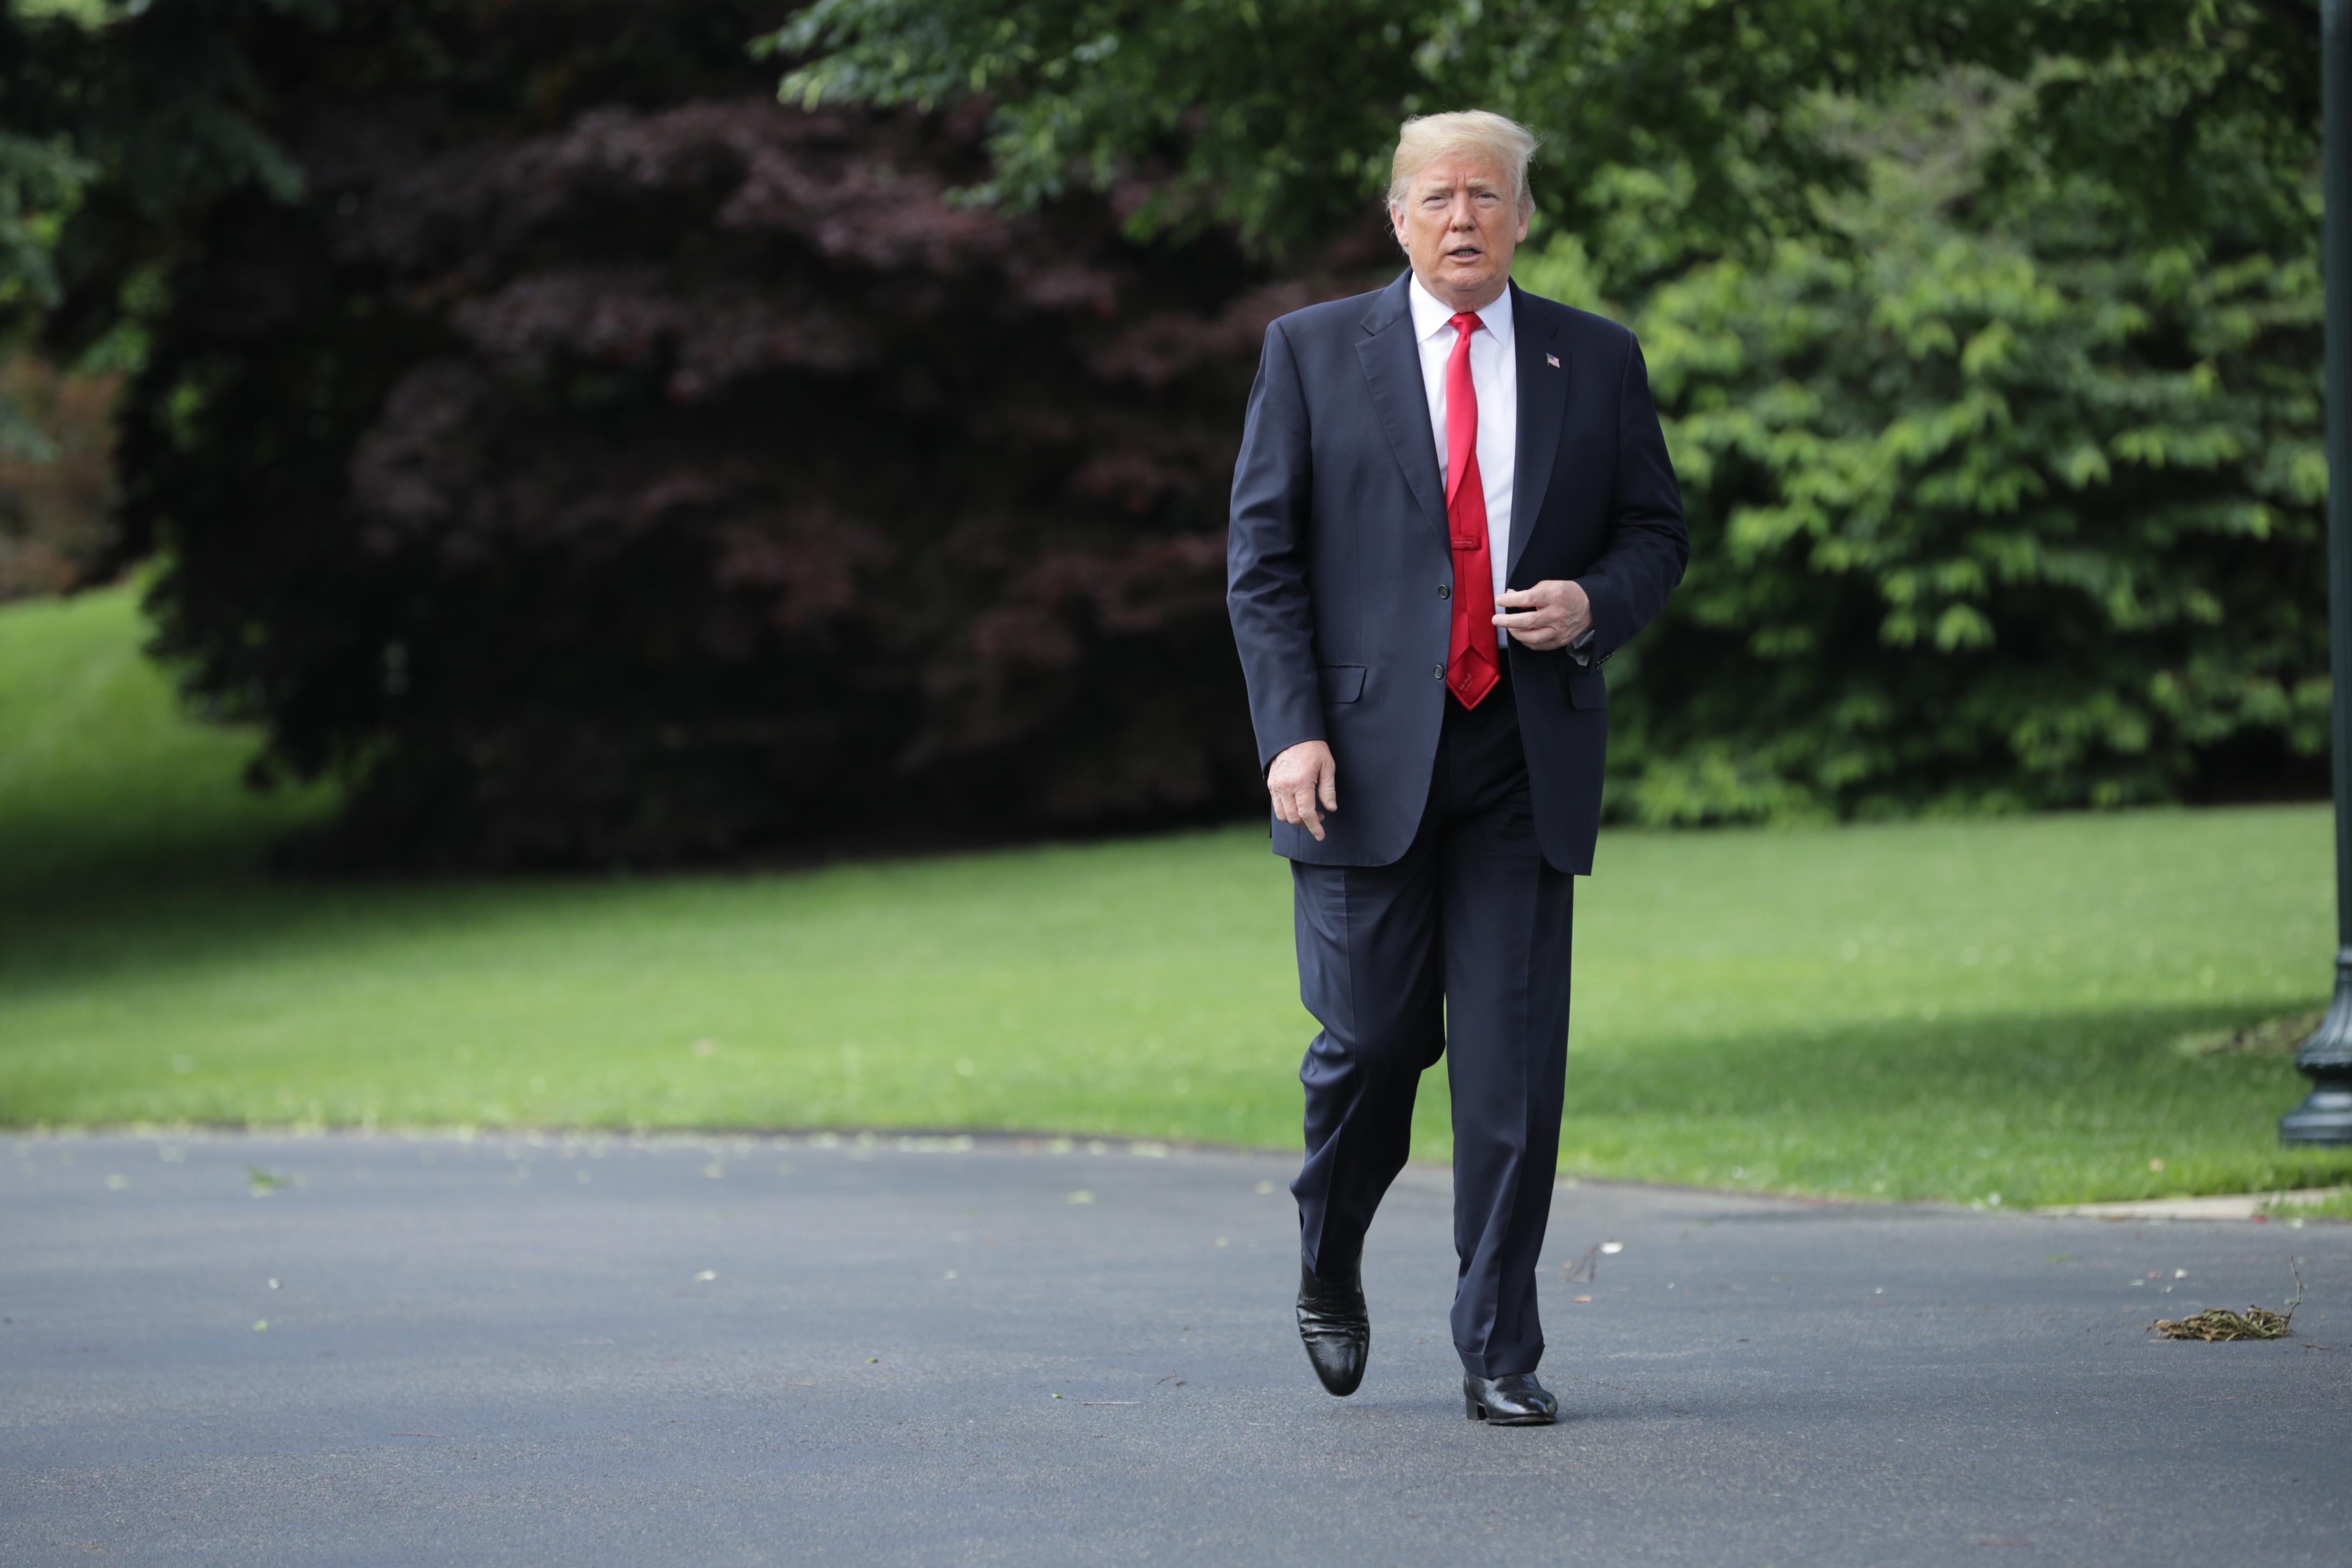 WASHINGTON, DC - MAY 23: U.S. President Donald Trump walks across the South Lawn while departing the White House May 23, 2018 in Washington, DC. Trump is traveling to New York where he will tour the Morrelly Homeland Security Center and then attend a roundtable discussion and dinner with supporters before returning to Washington. (Photo by Chip Somodevilla/Getty Images)